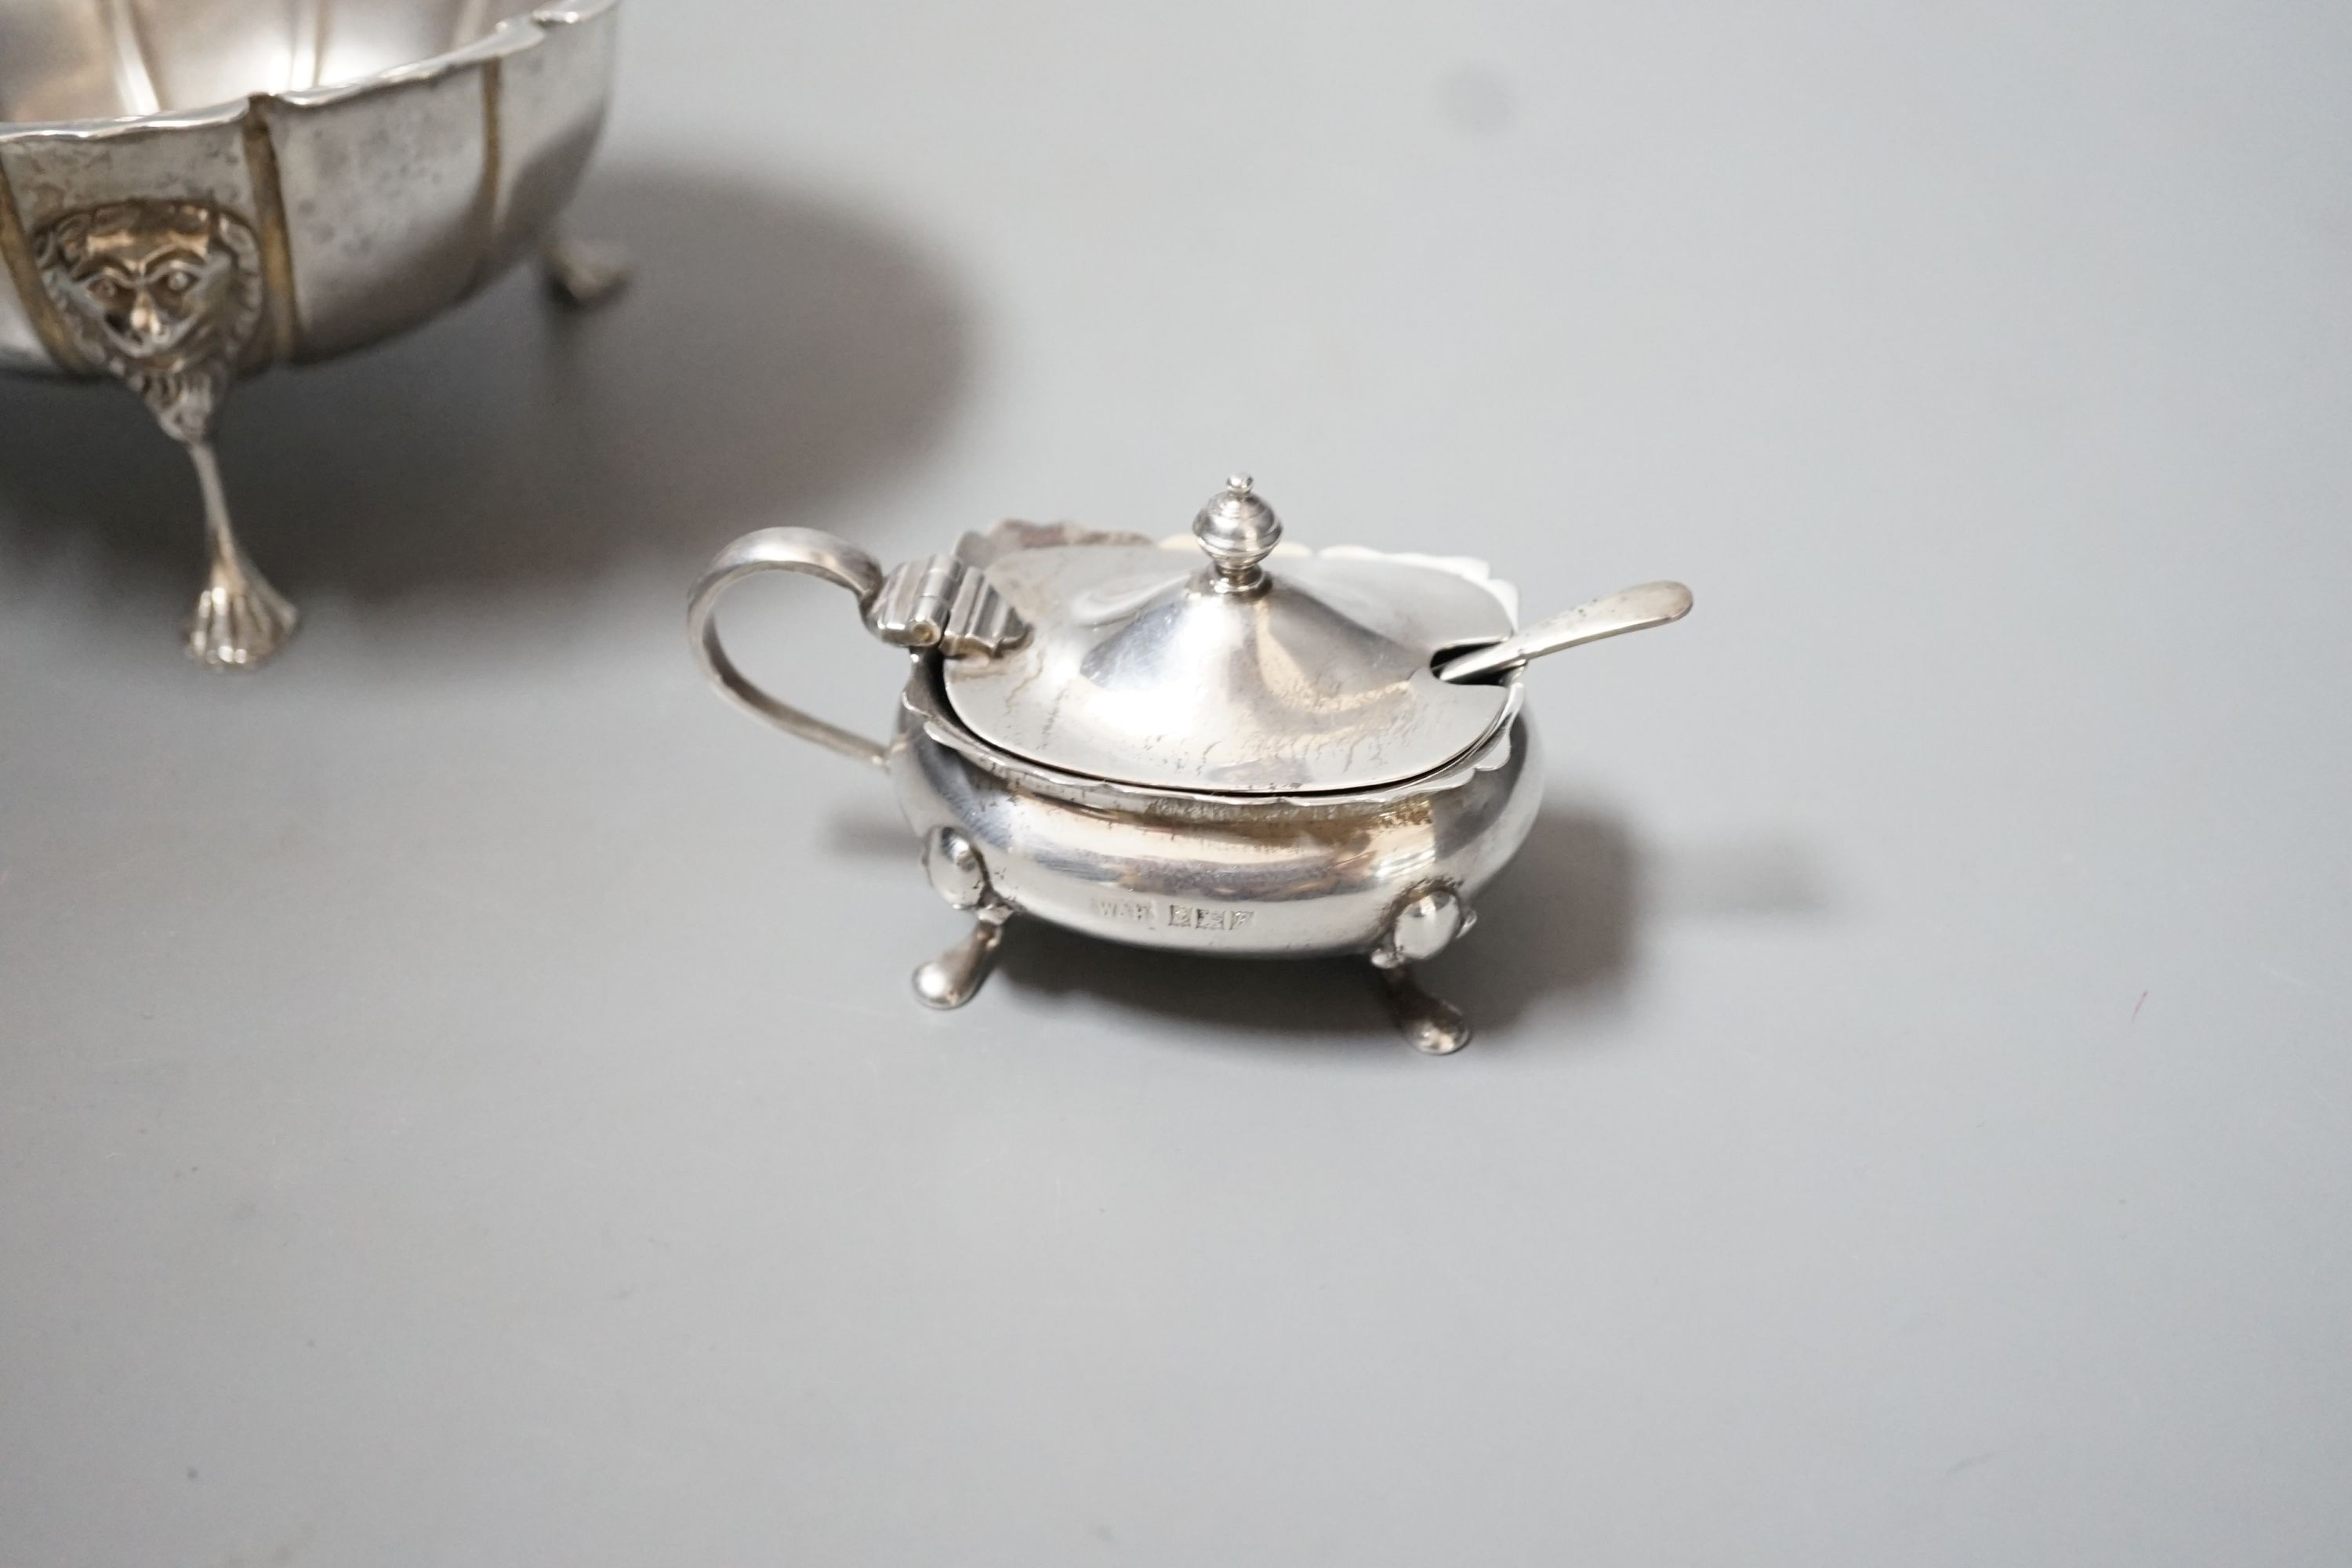 A George V Irish silver bowl, with lion mask knees on tripod supports, West & Son, Dublin, 1923, diameter 11.4cm and a silver mustard pot and spoon, 60z.